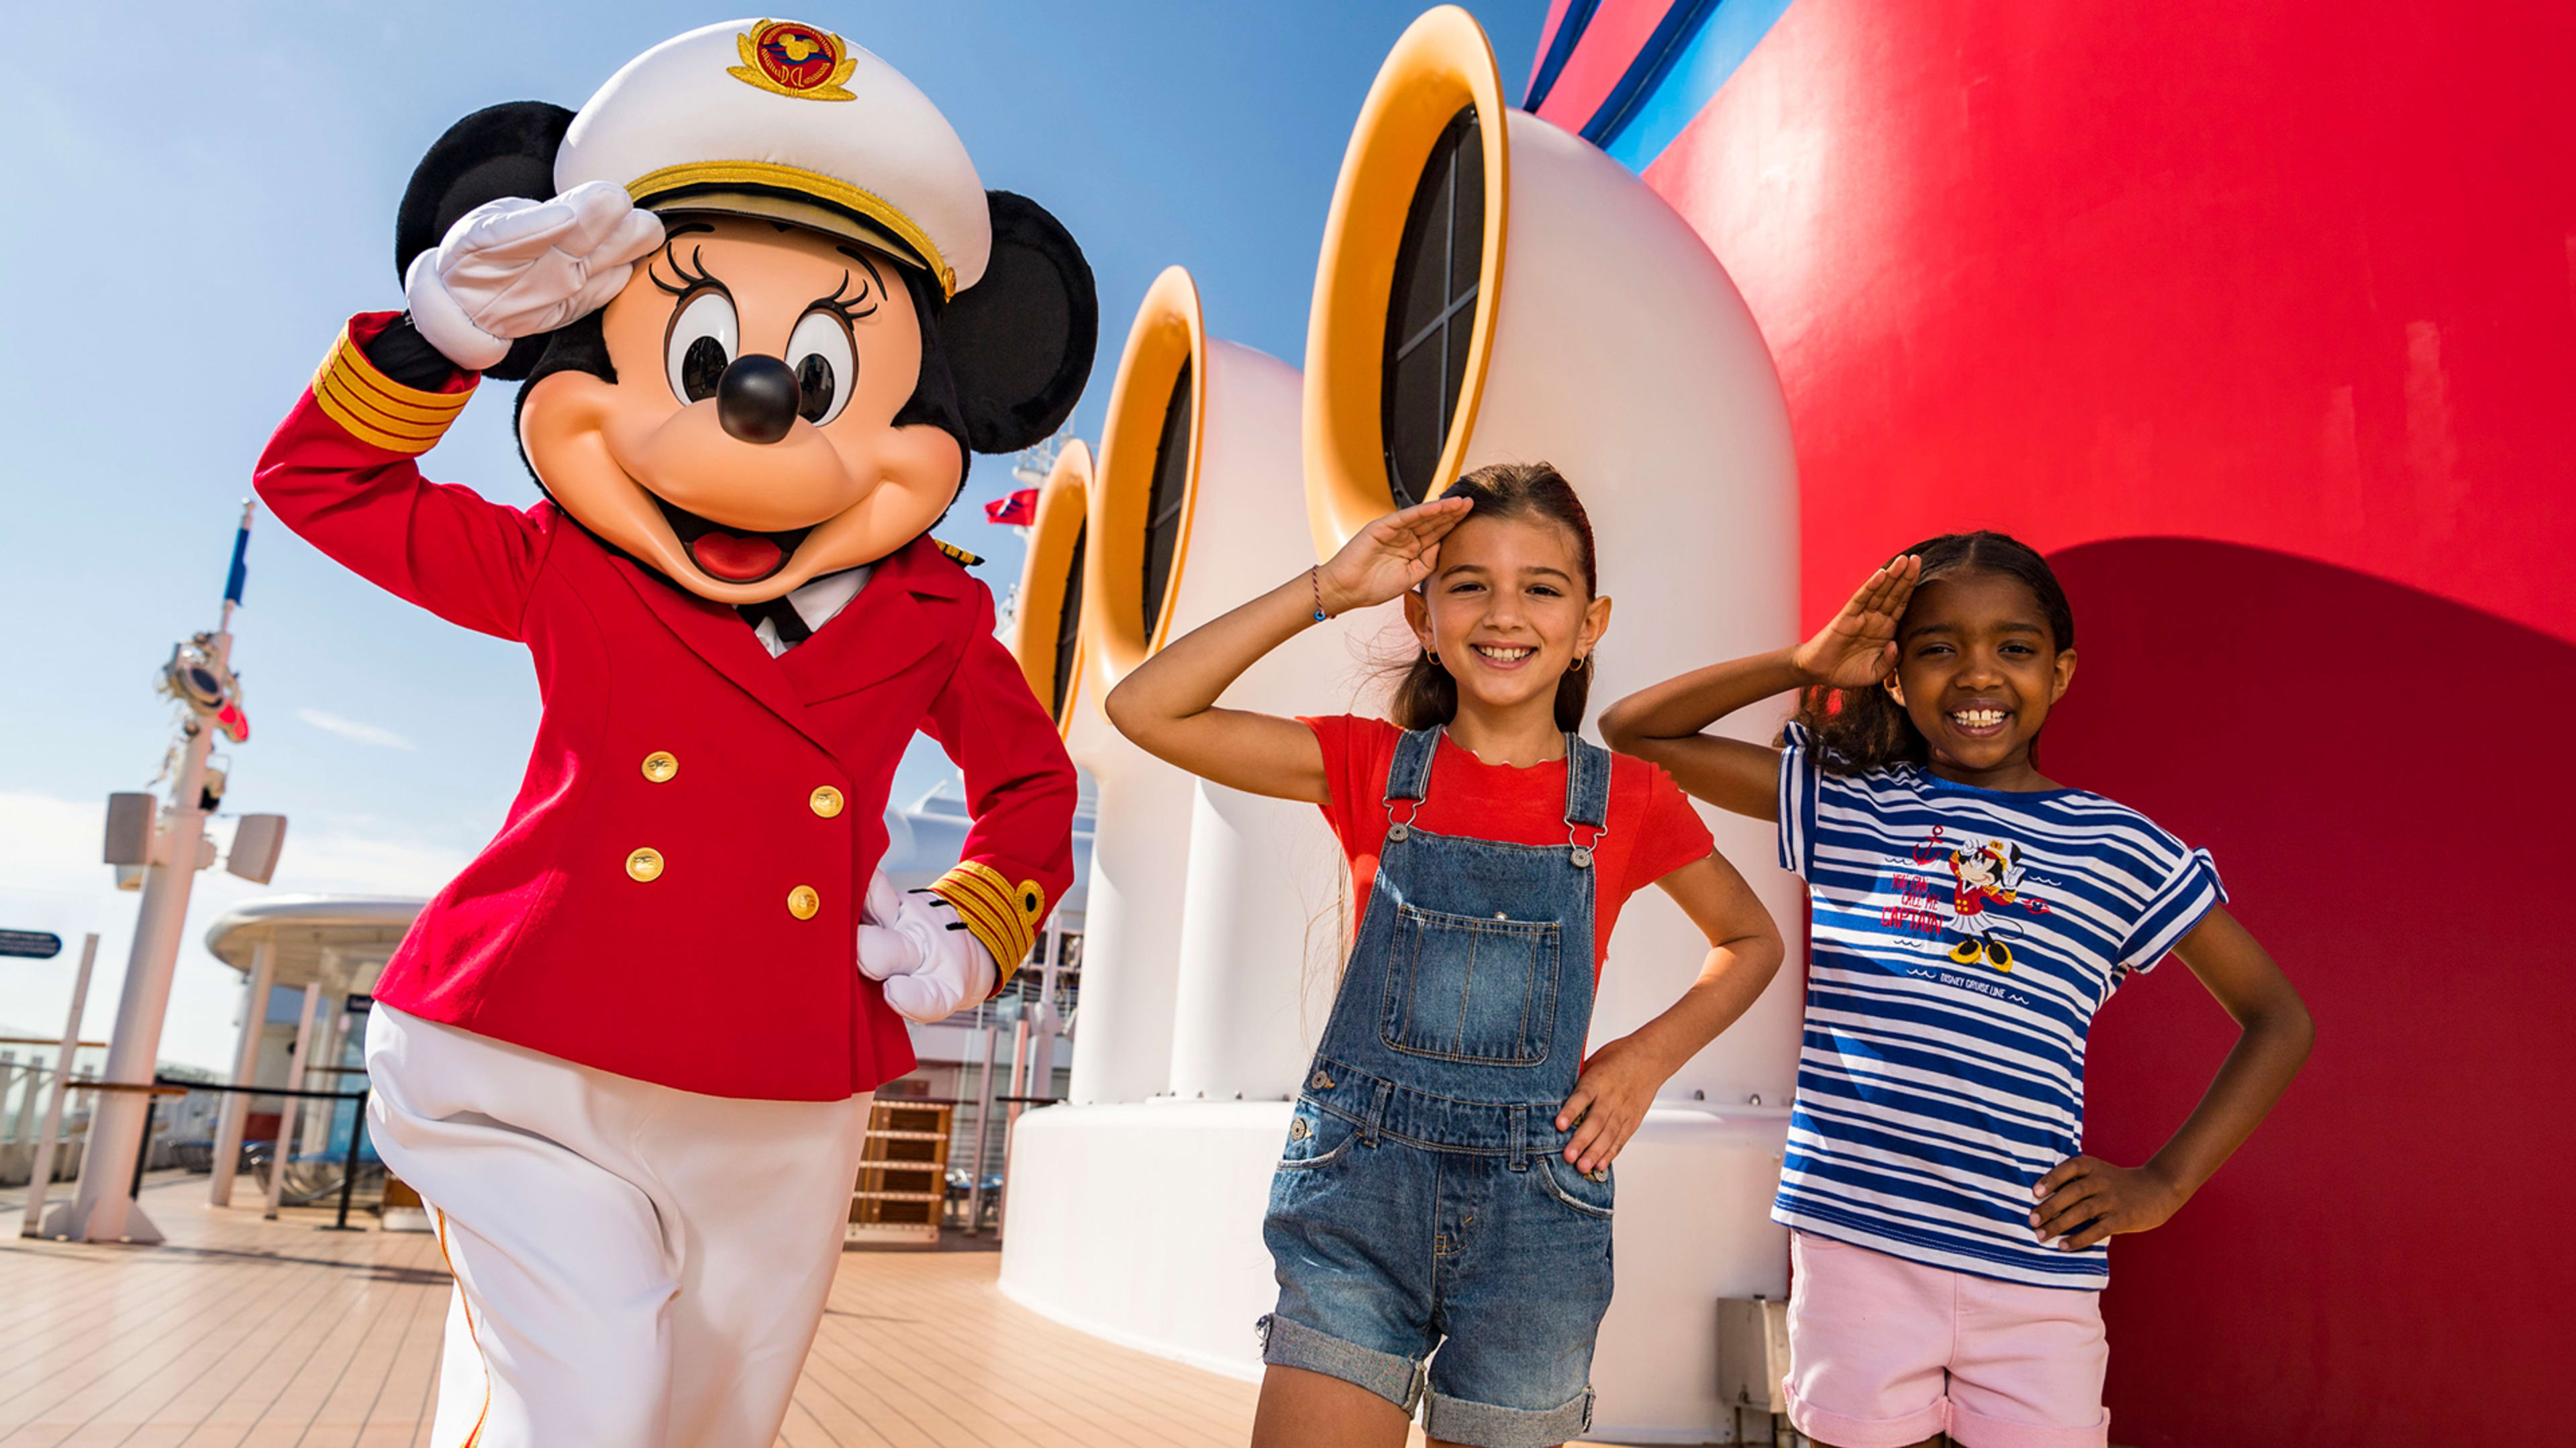 Minnie Mouse is the captain of all Disney cruises now